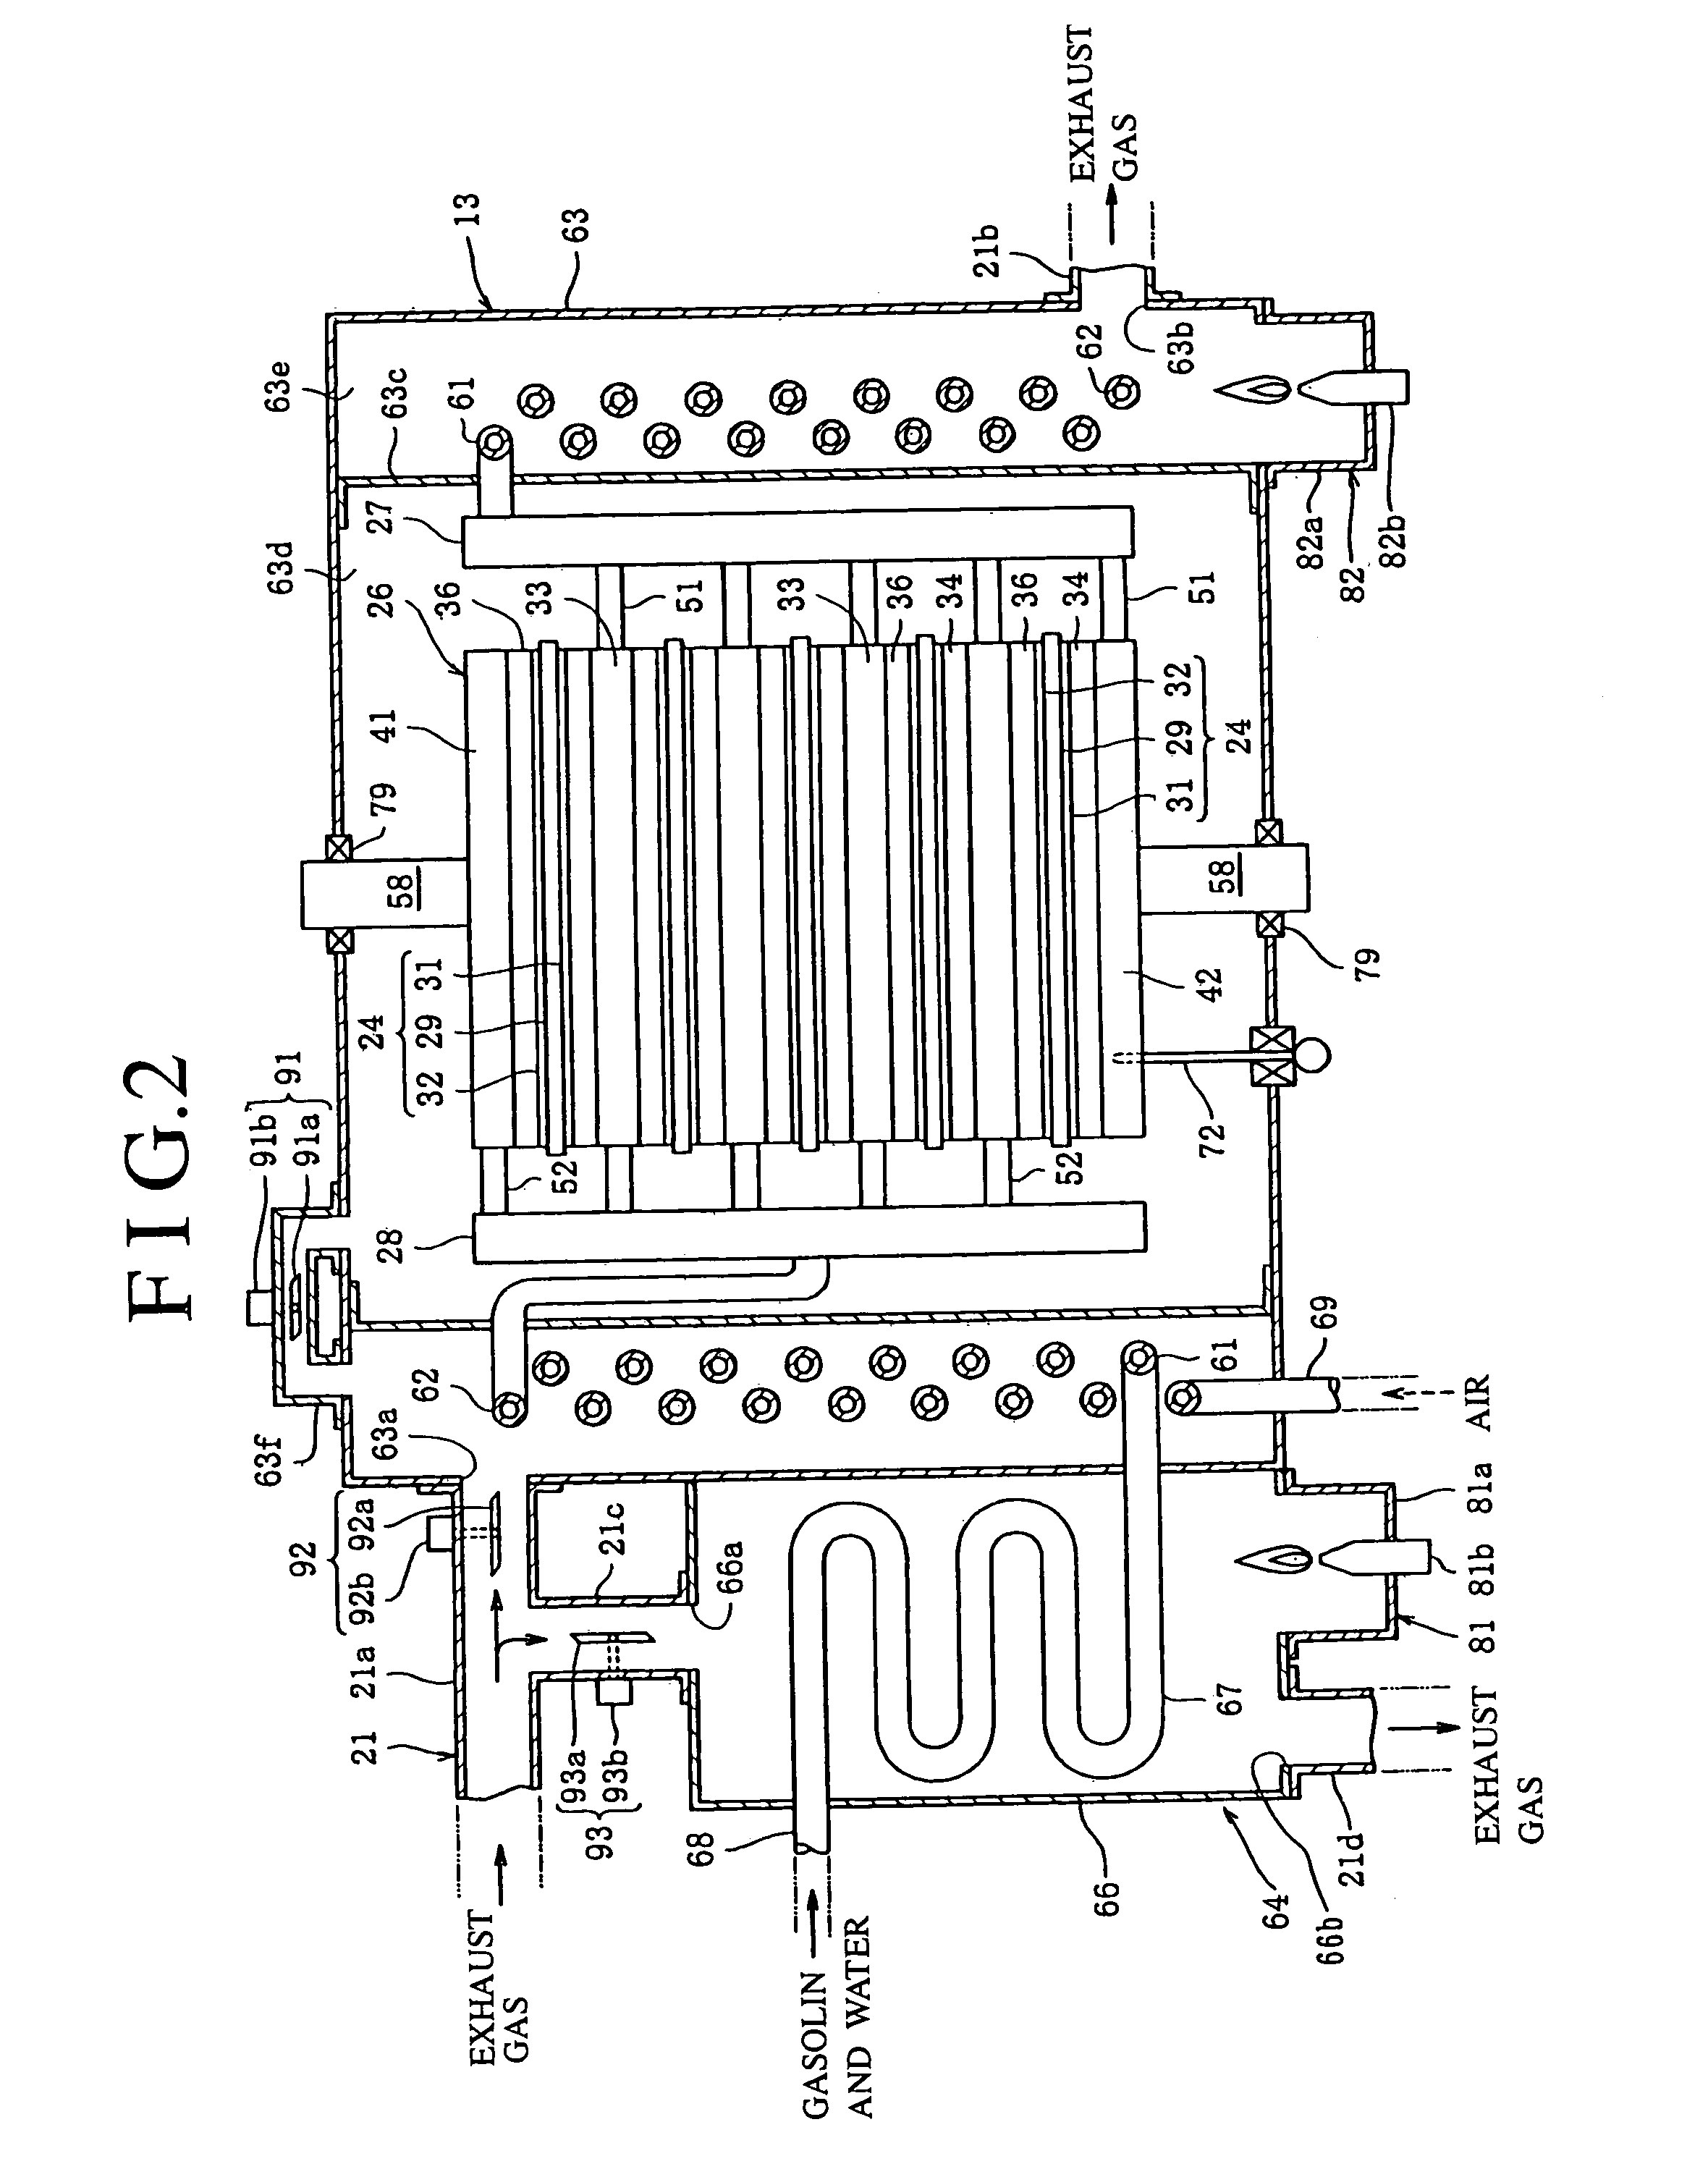 Hybrid power system including an engine and a fuel cell module